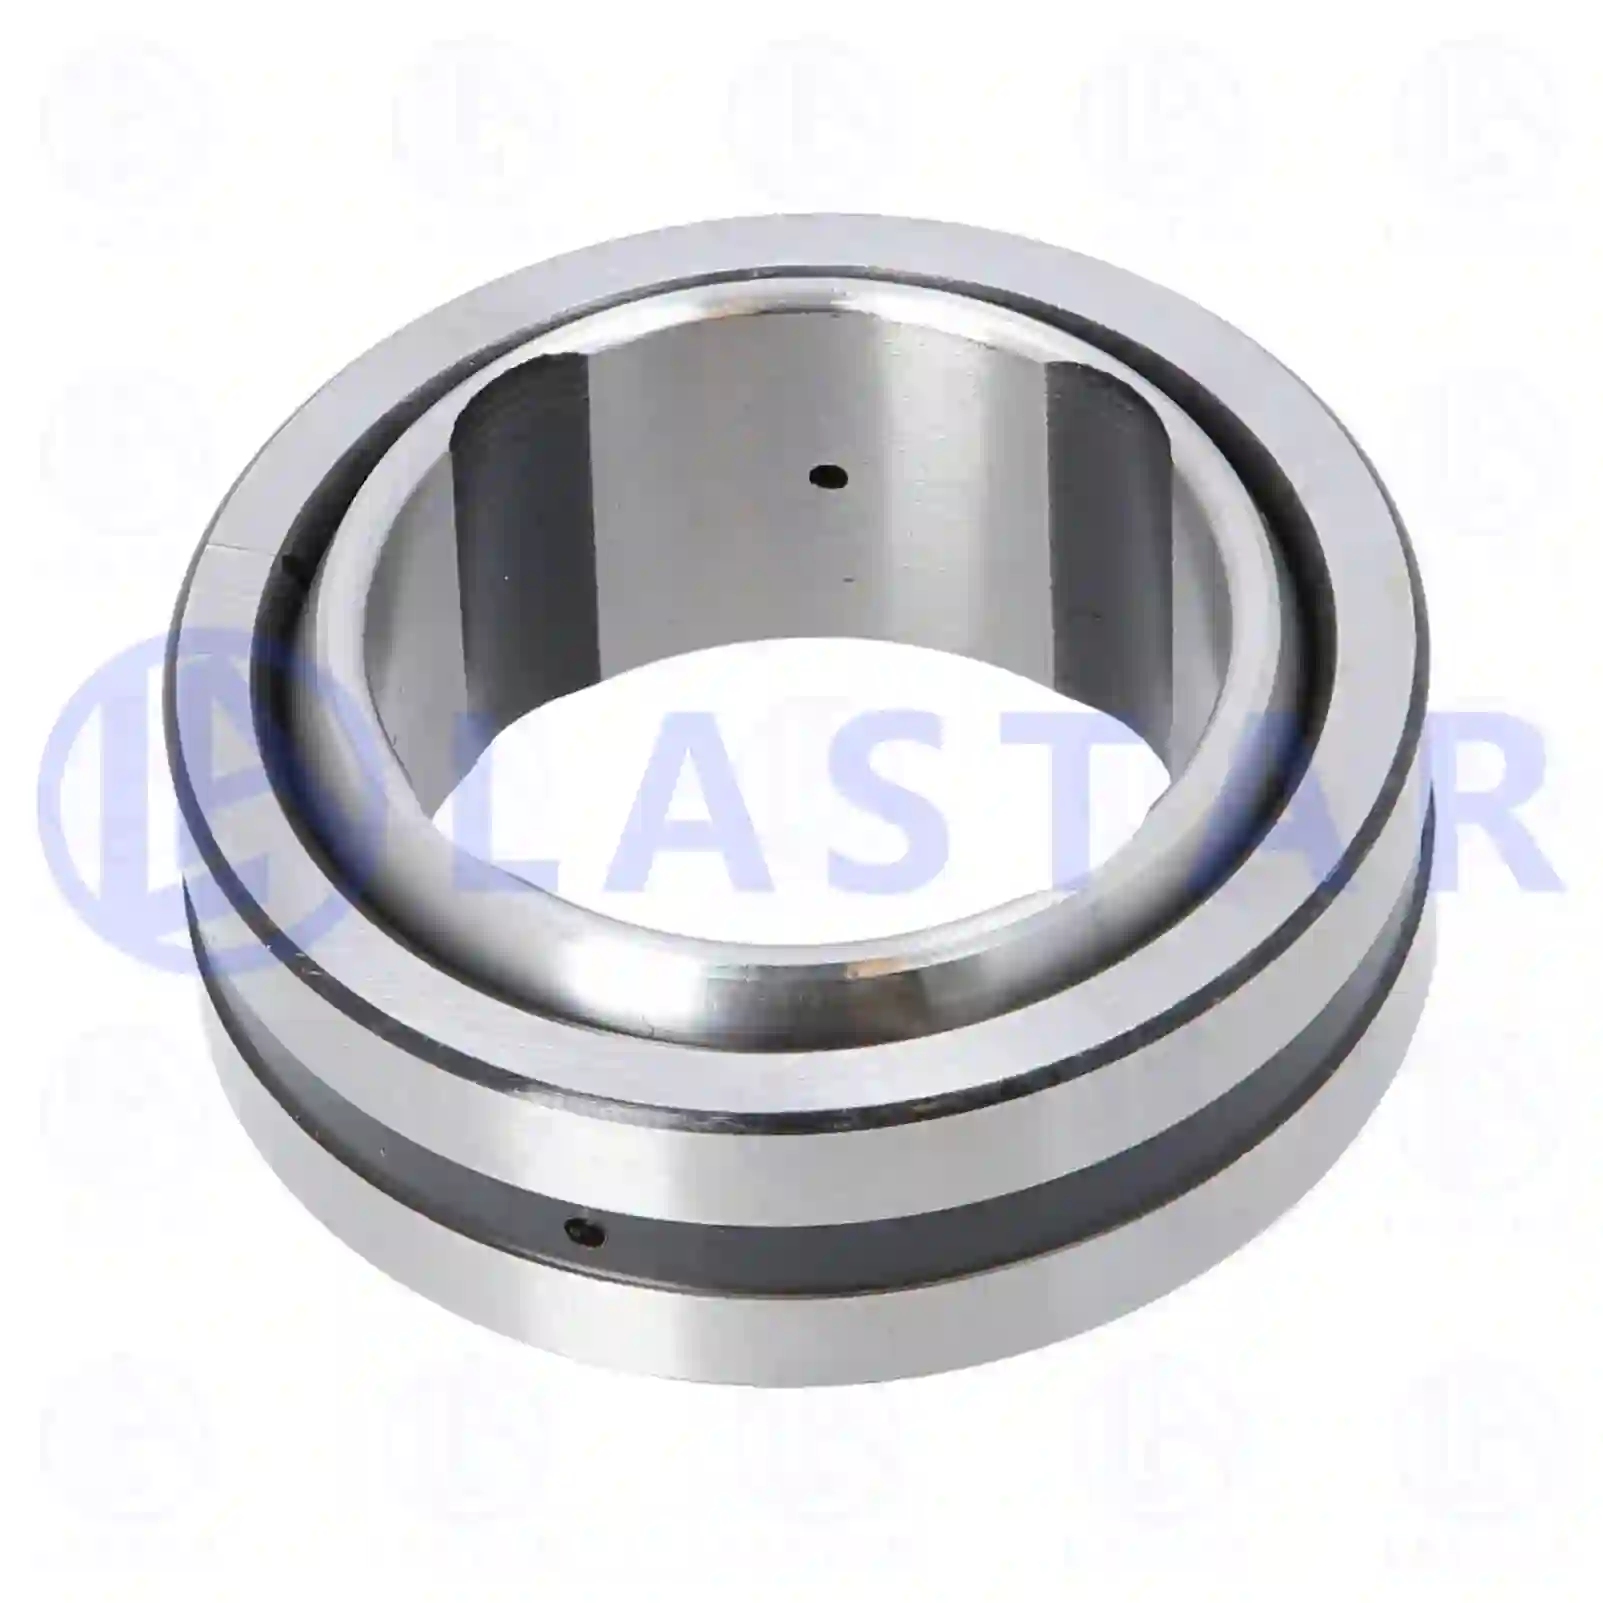 Joint bearing, 77729020, 06369590014, 06369590018, 06369590035, 81934300004, 0009816031, 0019812131, 0019815031, 5010260575, WHT005863 ||  77729020 Lastar Spare Part | Truck Spare Parts, Auotomotive Spare Parts Joint bearing, 77729020, 06369590014, 06369590018, 06369590035, 81934300004, 0009816031, 0019812131, 0019815031, 5010260575, WHT005863 ||  77729020 Lastar Spare Part | Truck Spare Parts, Auotomotive Spare Parts